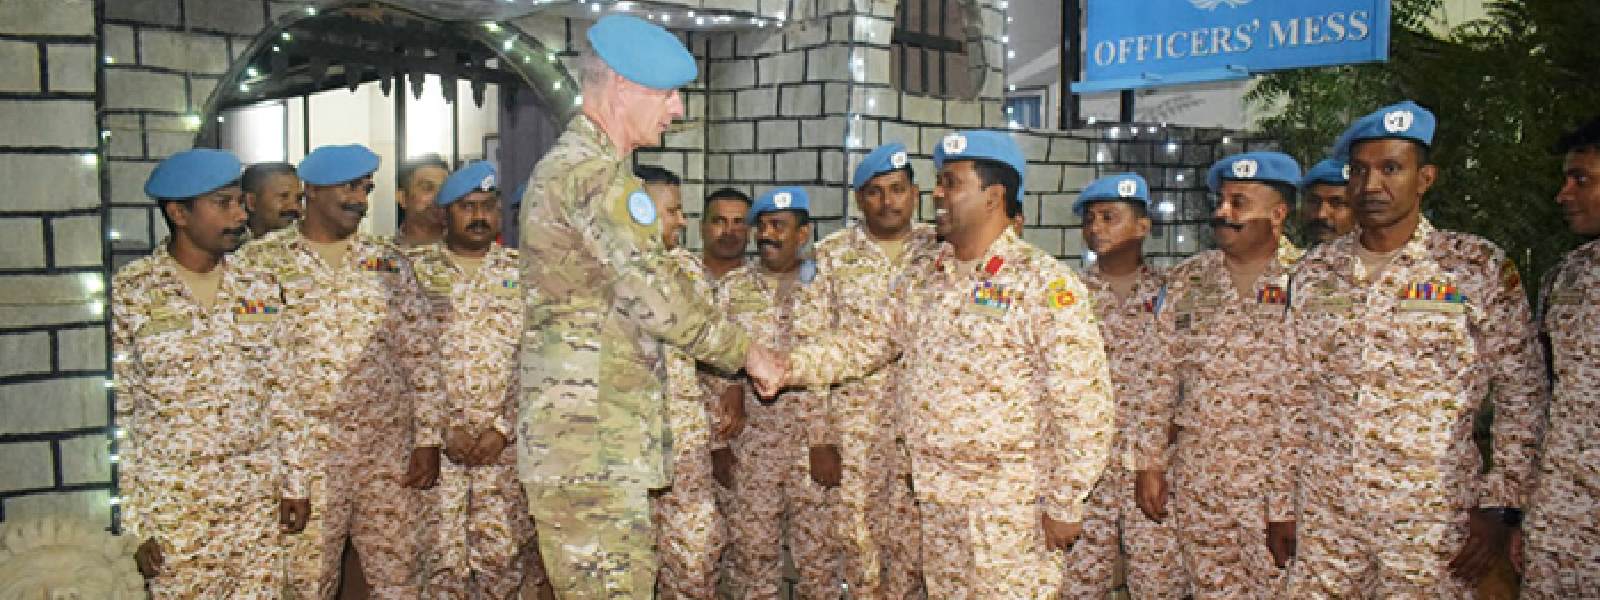 MINUSMA commendation for SL troops in Mali